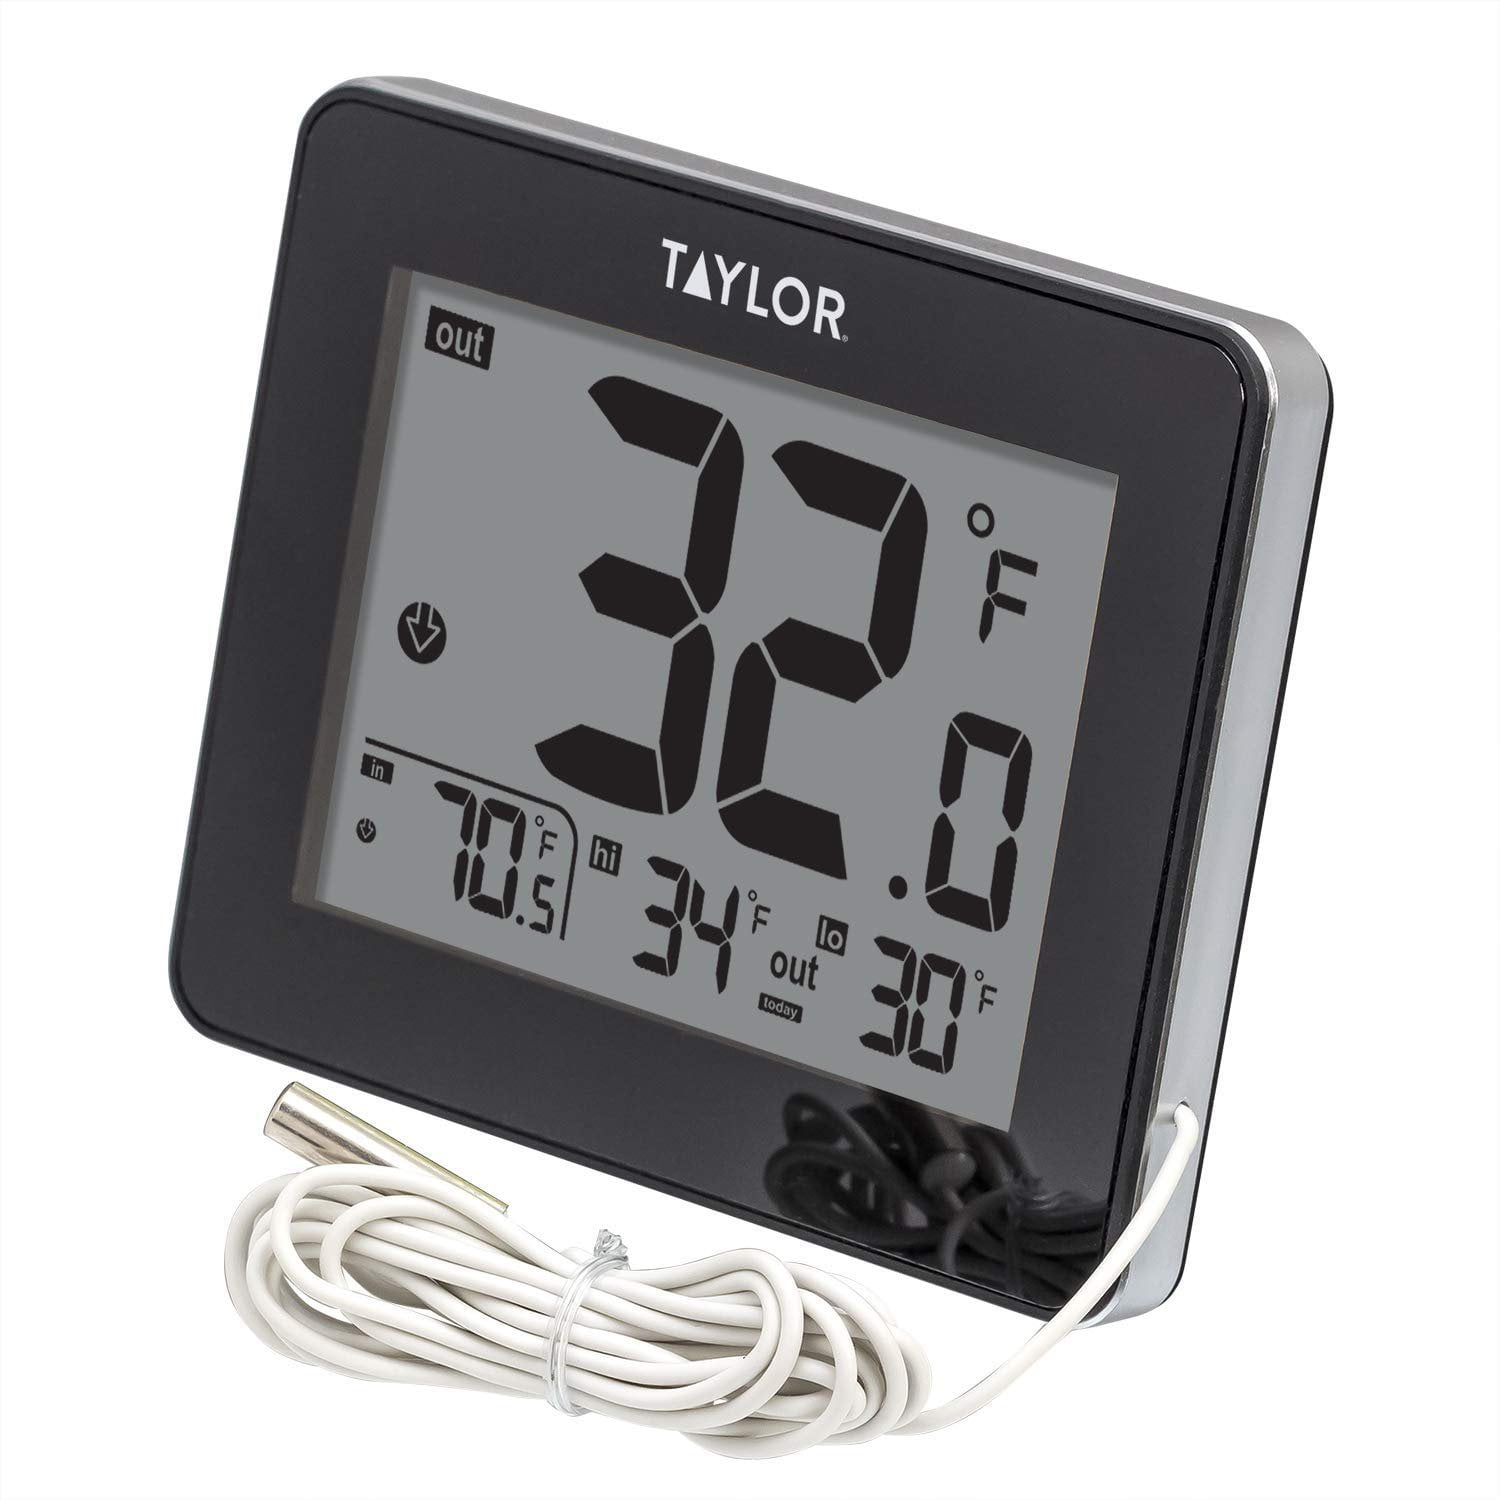 Taylor 1733 IndoorOutdoor Digital Thermometer with Barometer Timer